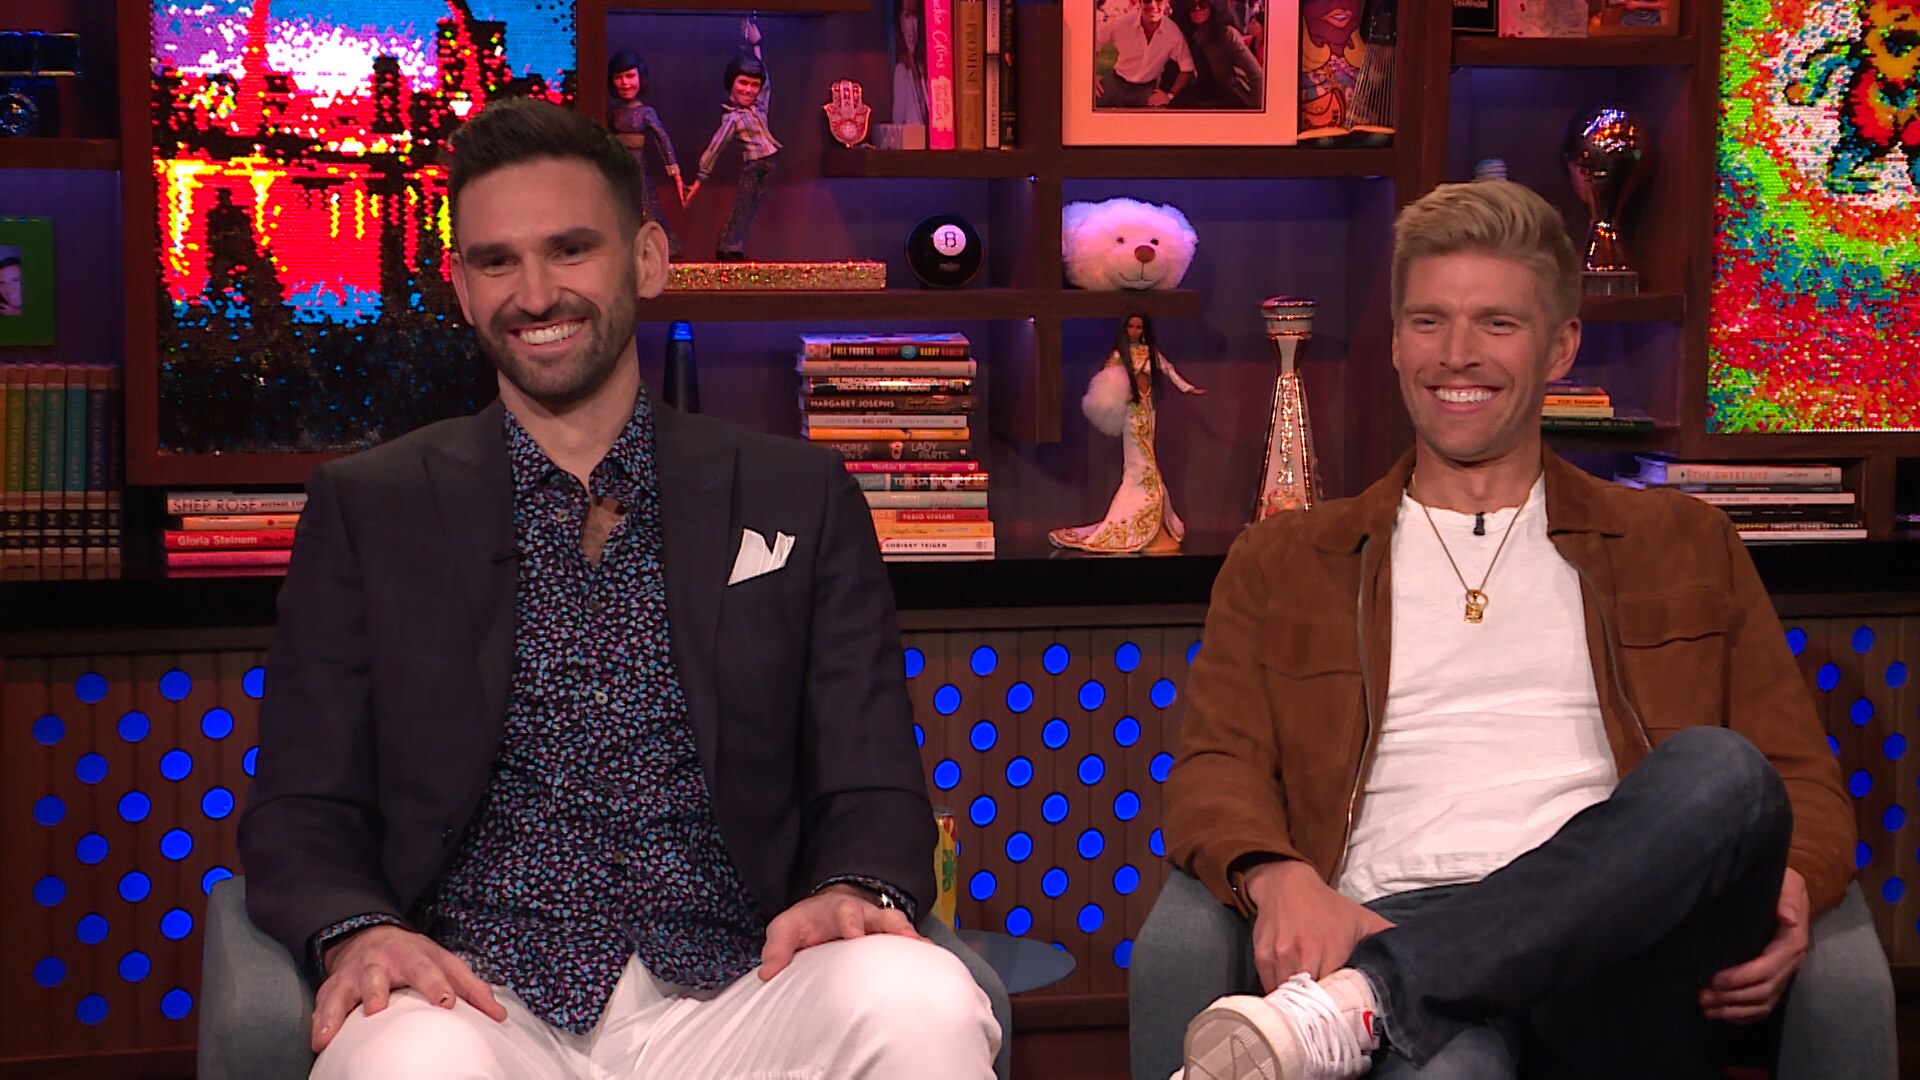 Watch Watch What Happens Live Highlight Andy Cohen Asks Carl Radke About His Same Sex Hook Up